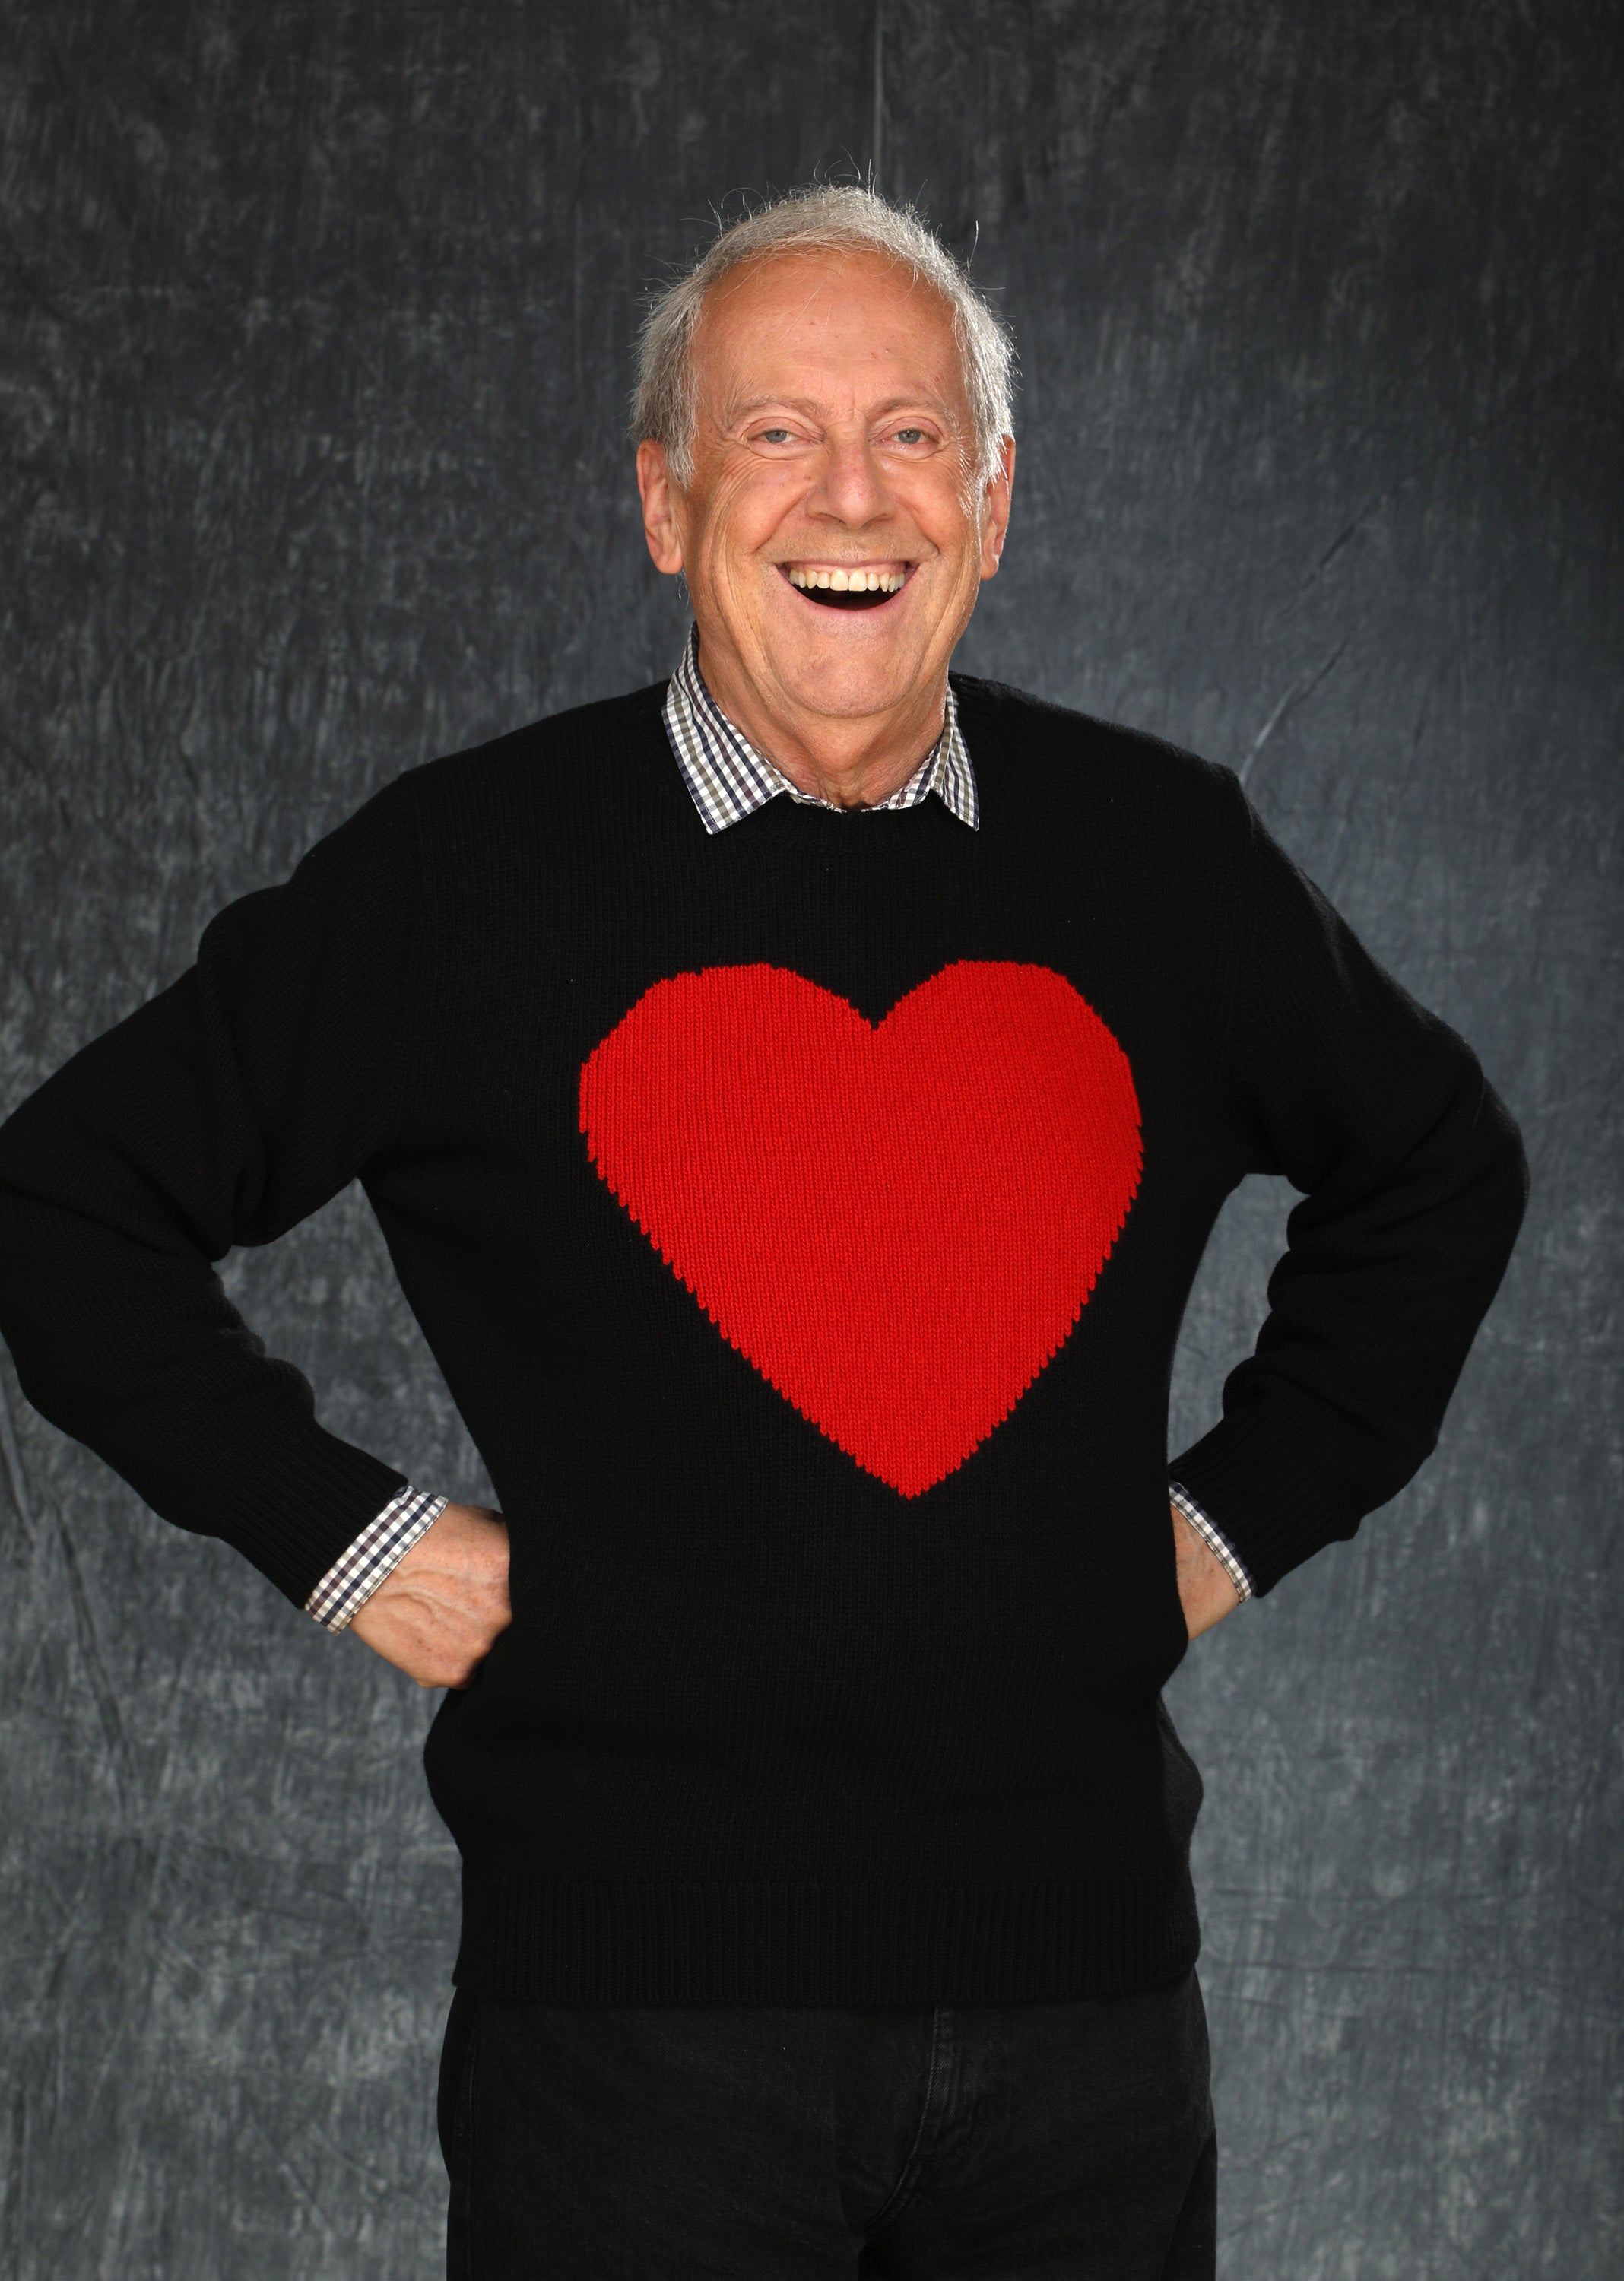 Men's Heart Sweater and George